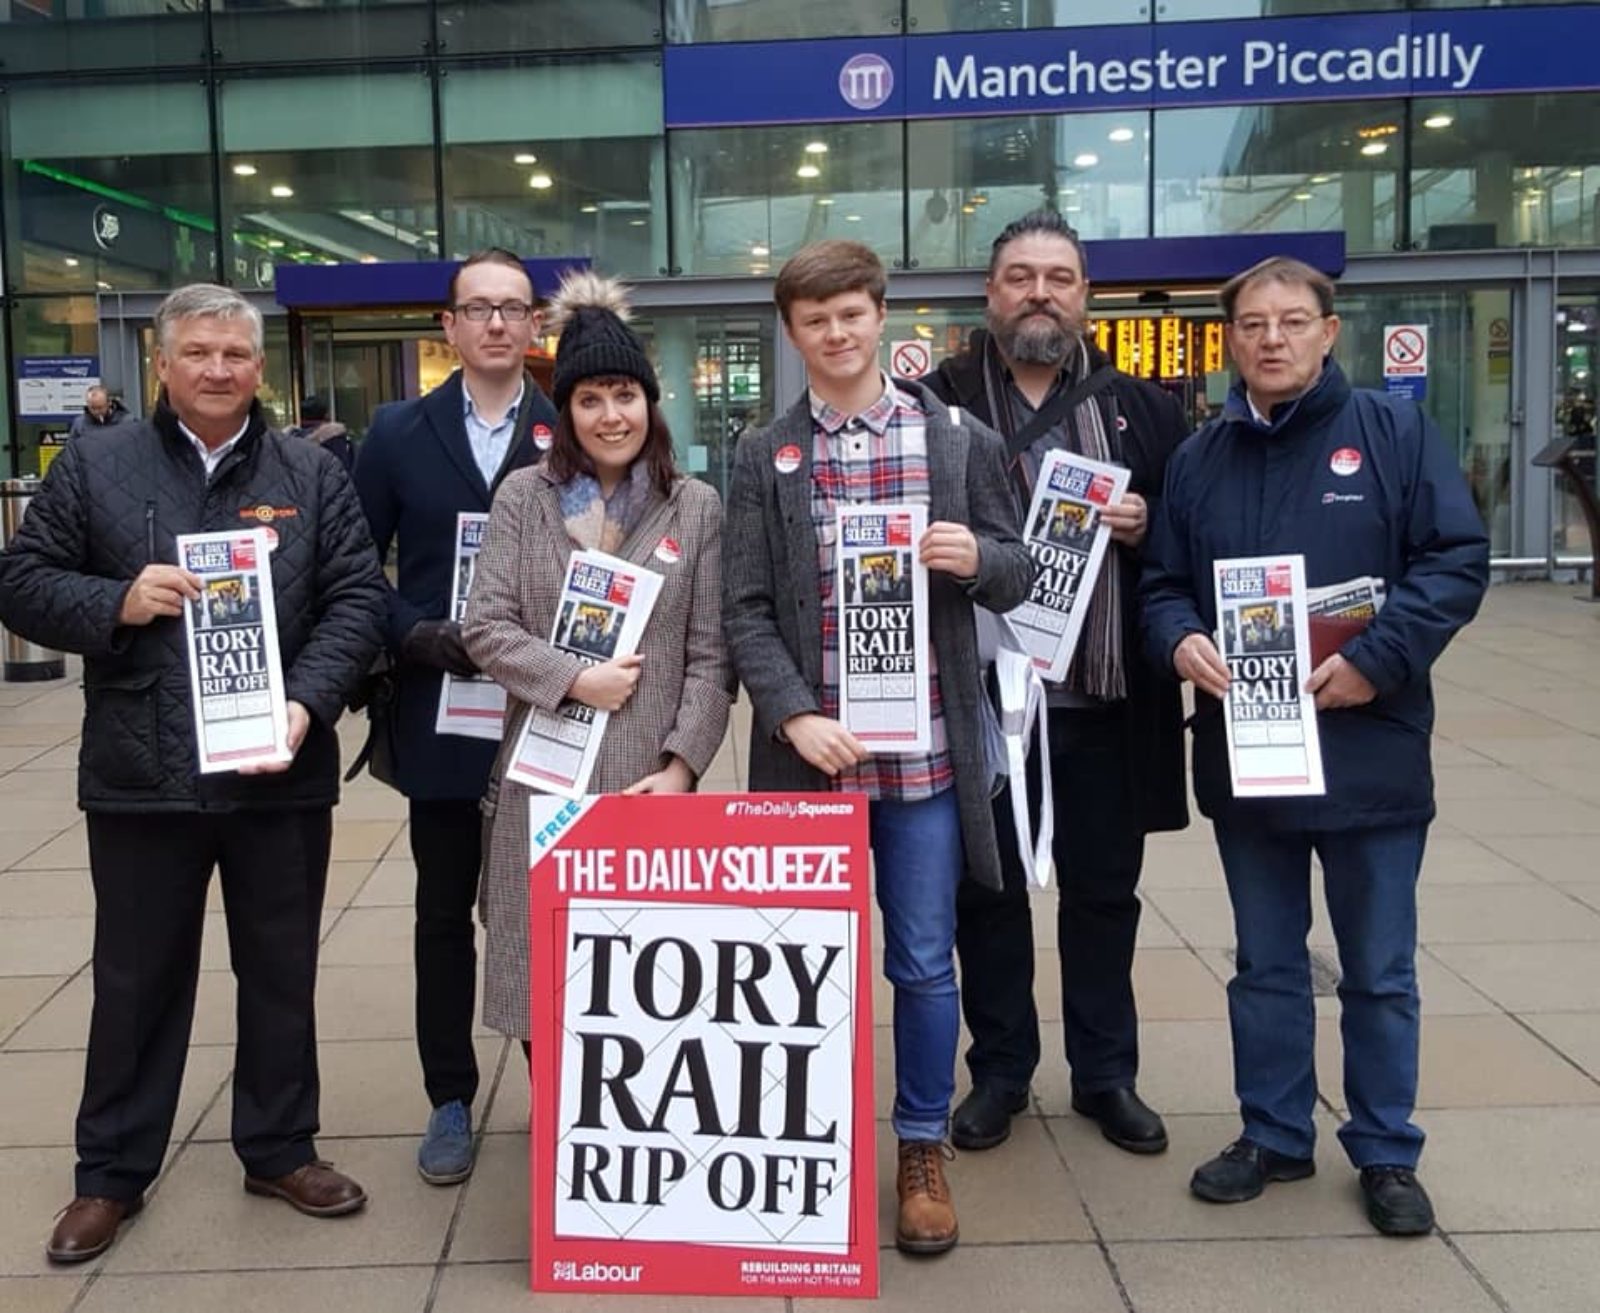 Members of Manchester Central Labour outside Piccadilly station highlighting the "Daily Squeeze" driven by the Tory Rail Rip Off